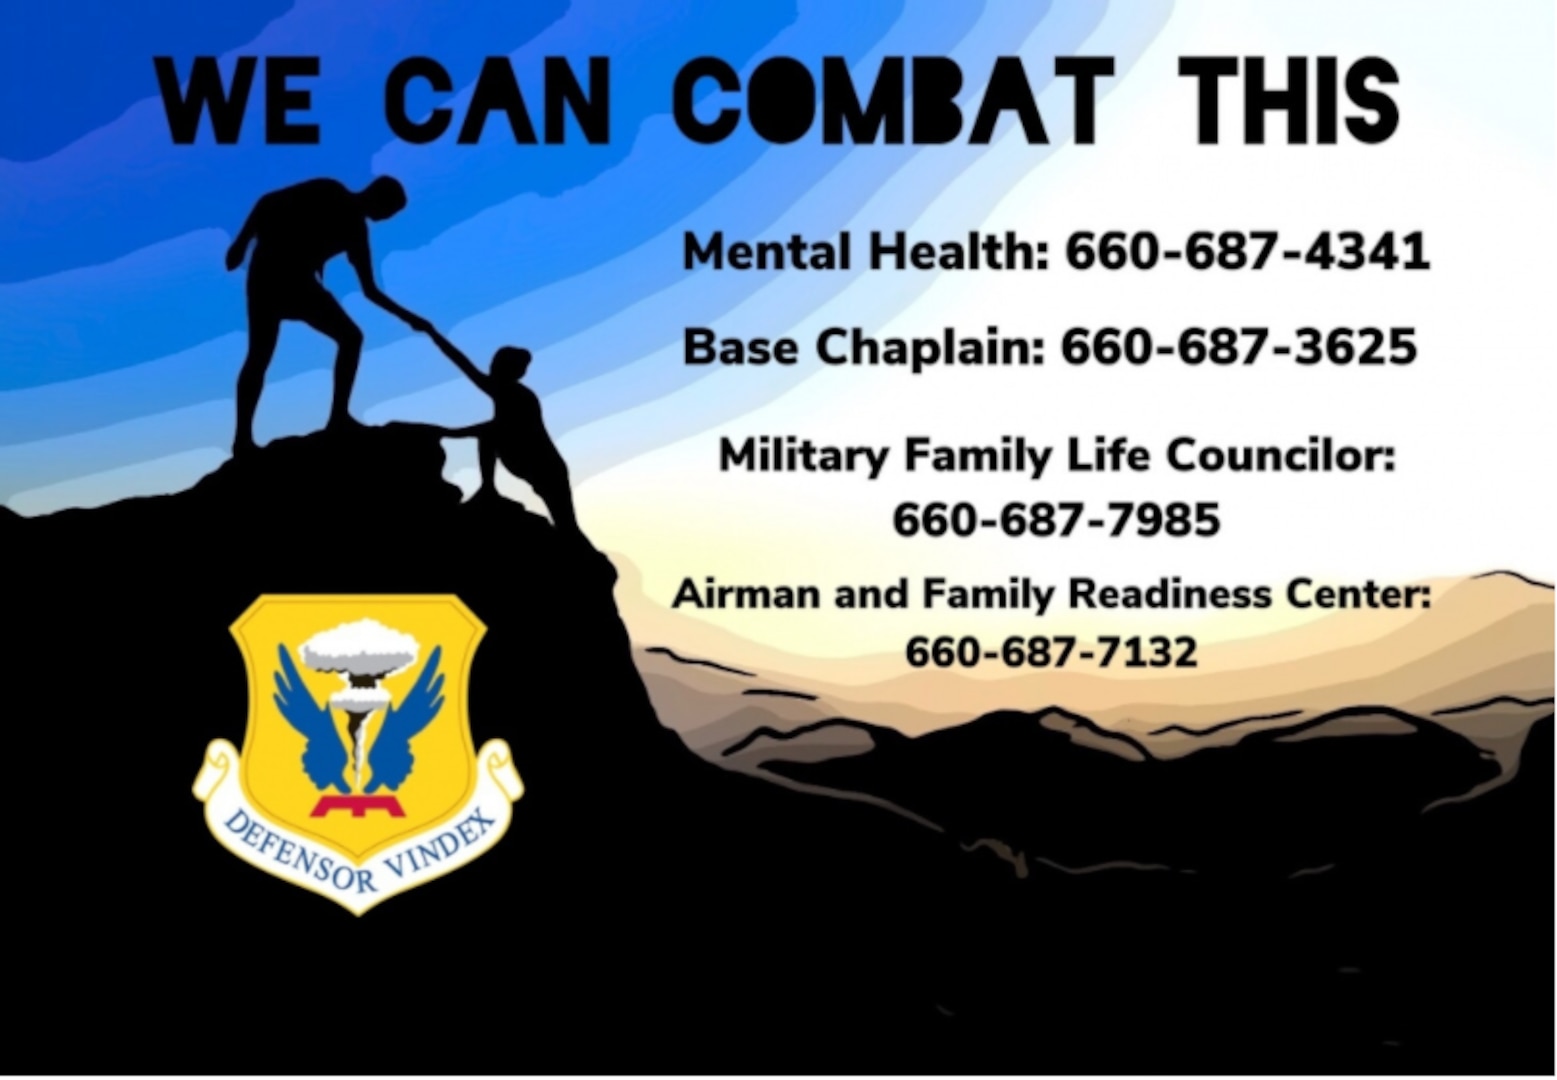 Post-traumatic stress disorder is a result of an individual witnessing or experiencing a traumatic event. PTSD Awareness day takes place every year on June 27 in recognition of those who are affected by this disorder. (U.S. Air Force graphic by Airman 1st Class Devan Halstead)